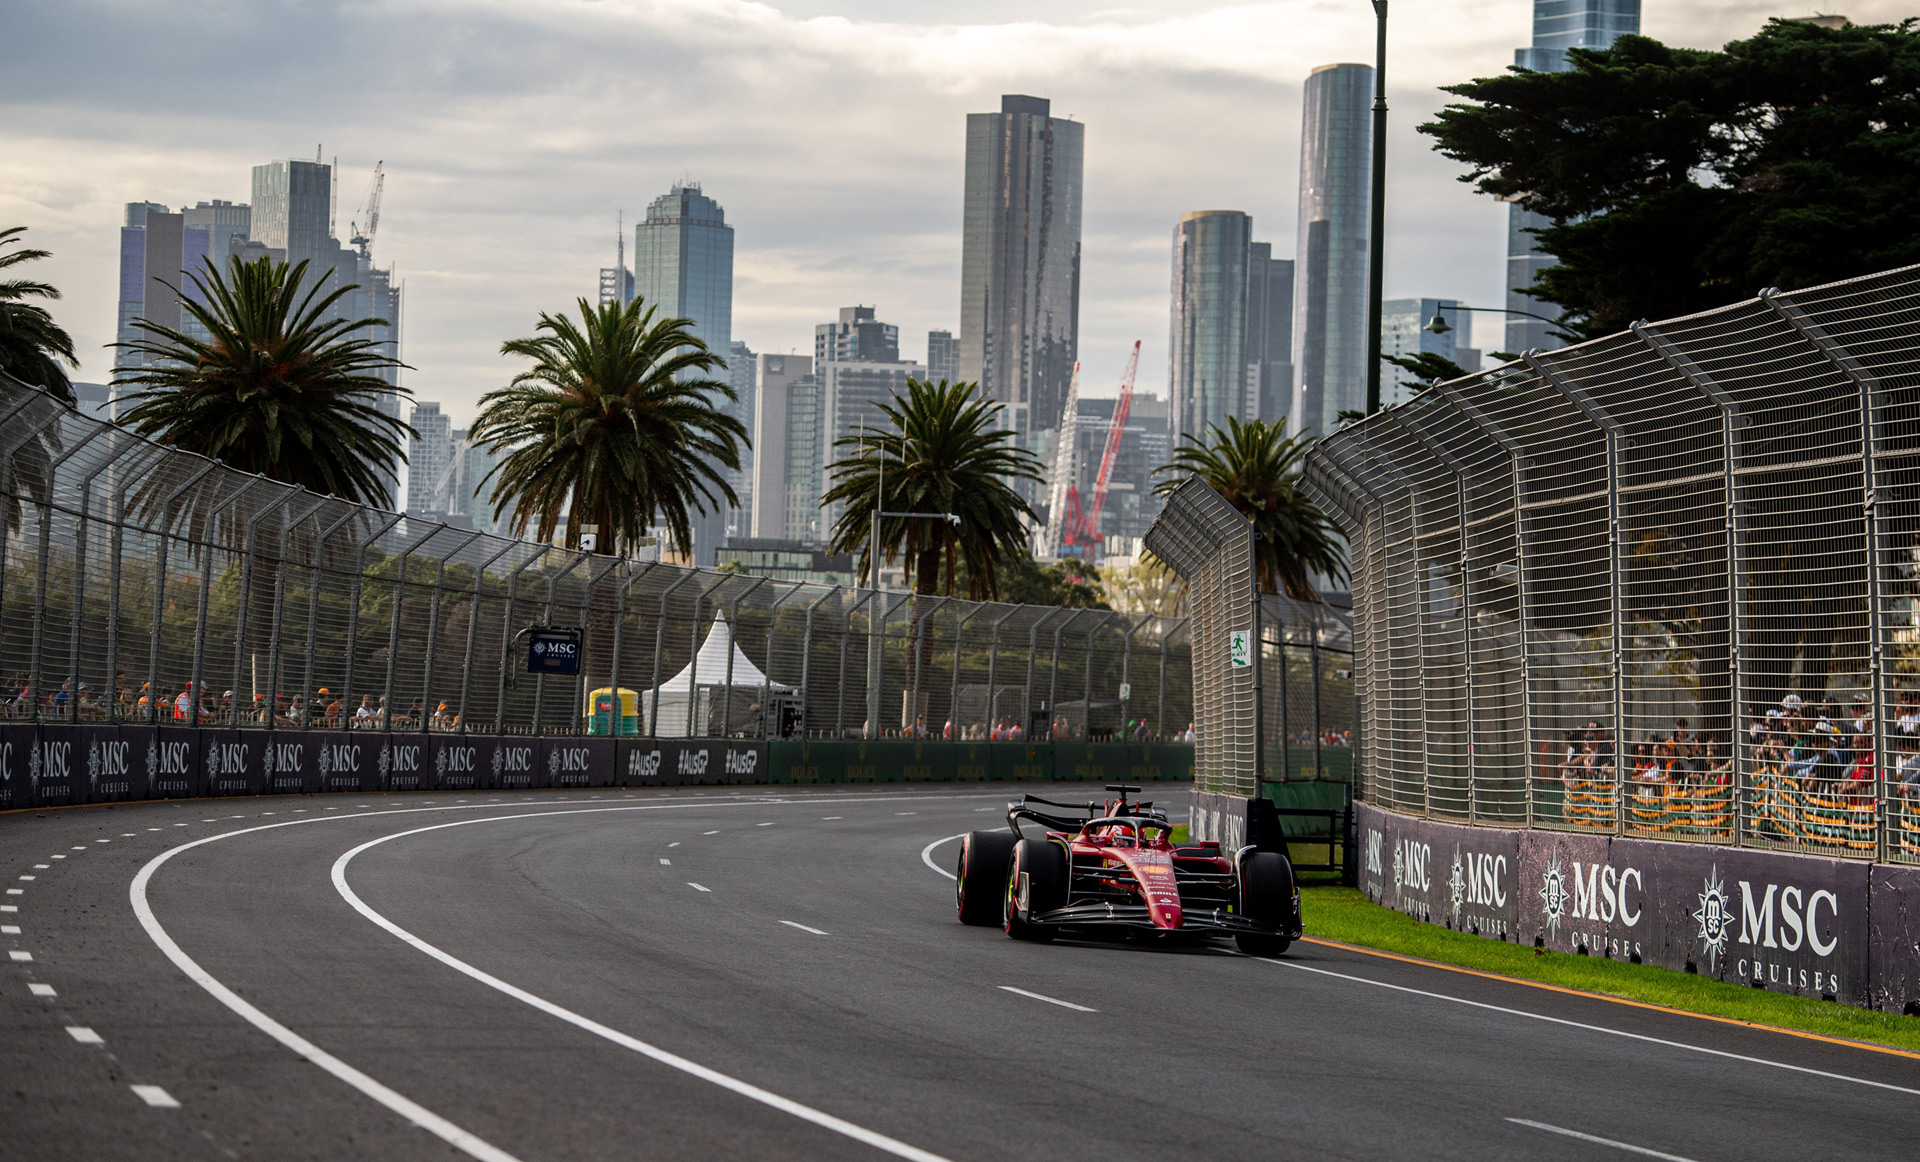 2022 F1 Australian Grand Prix preview Aussie race returns with revised circuit